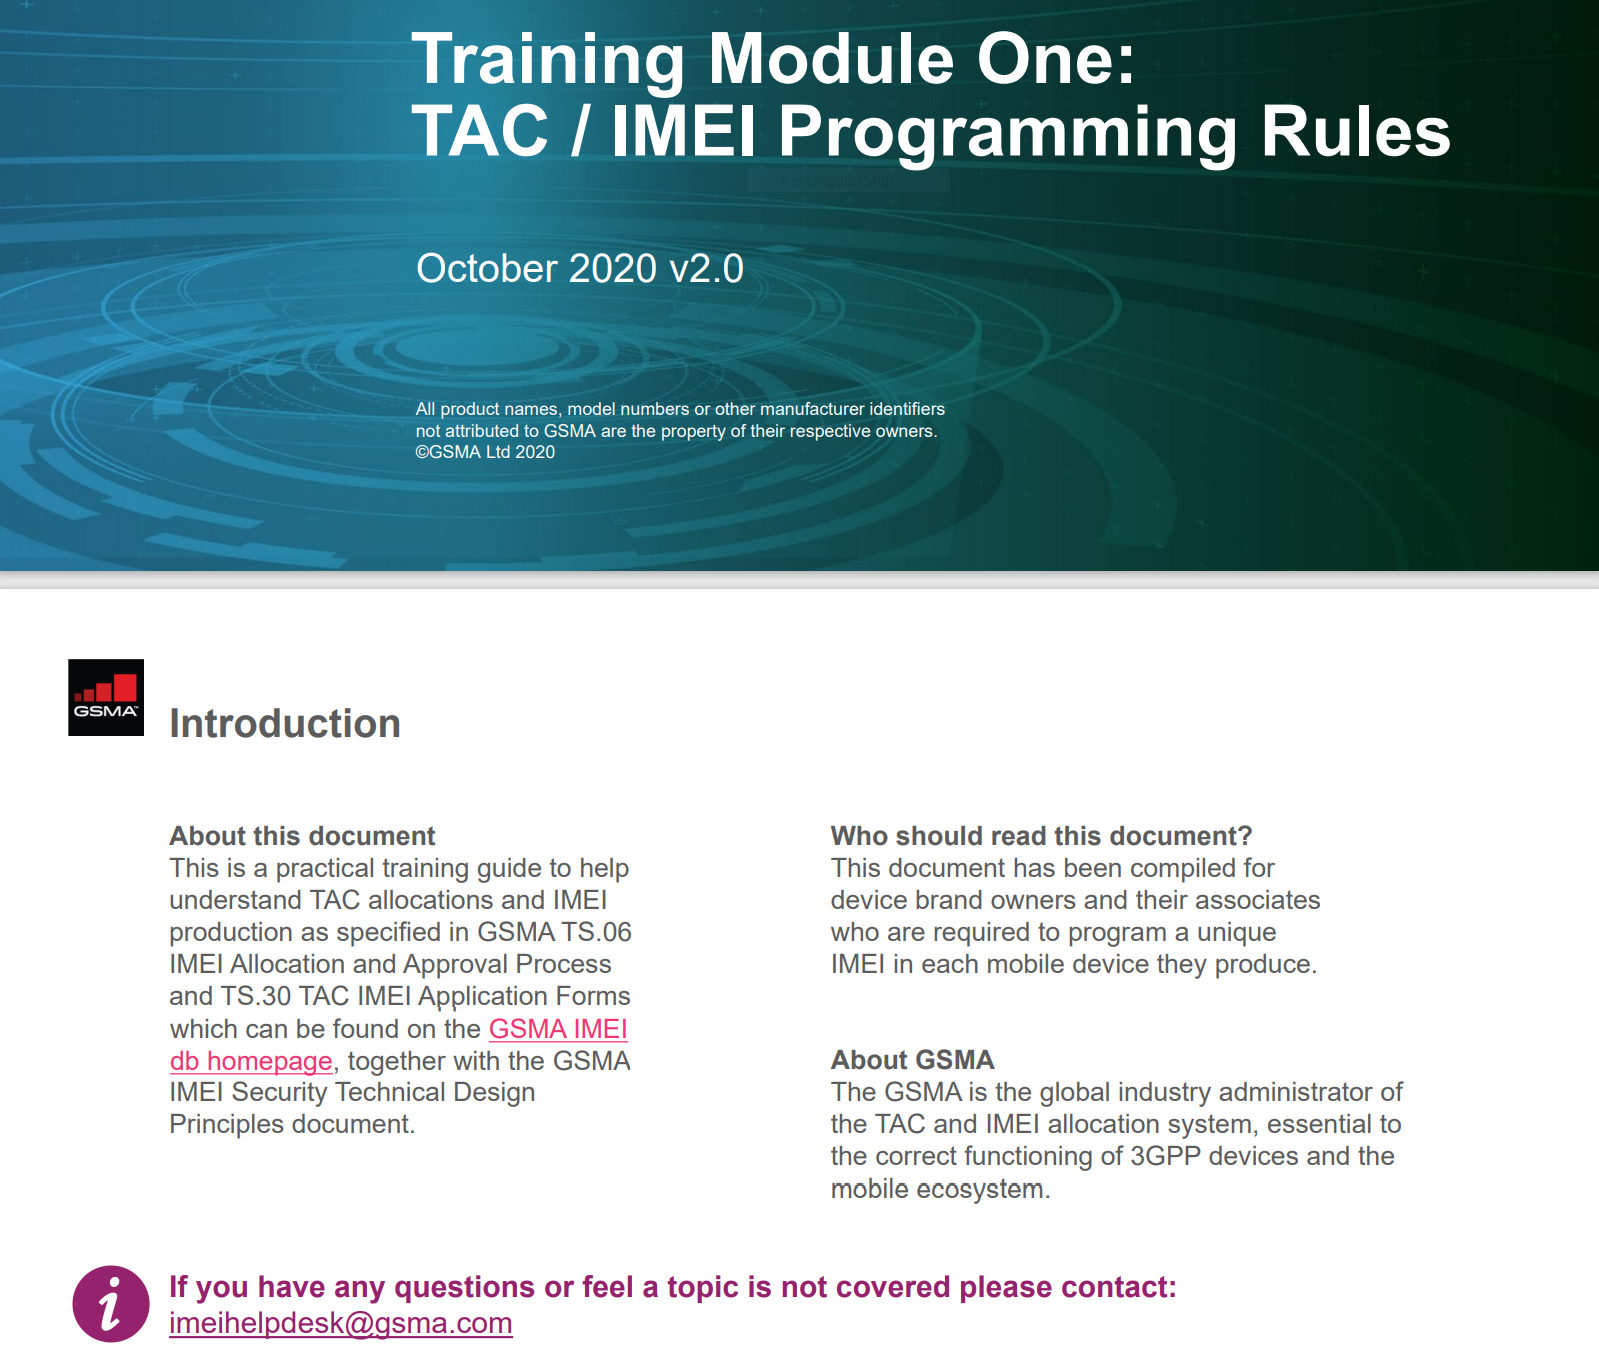 Screen grab from page 1 of a GSMA training PDF document.